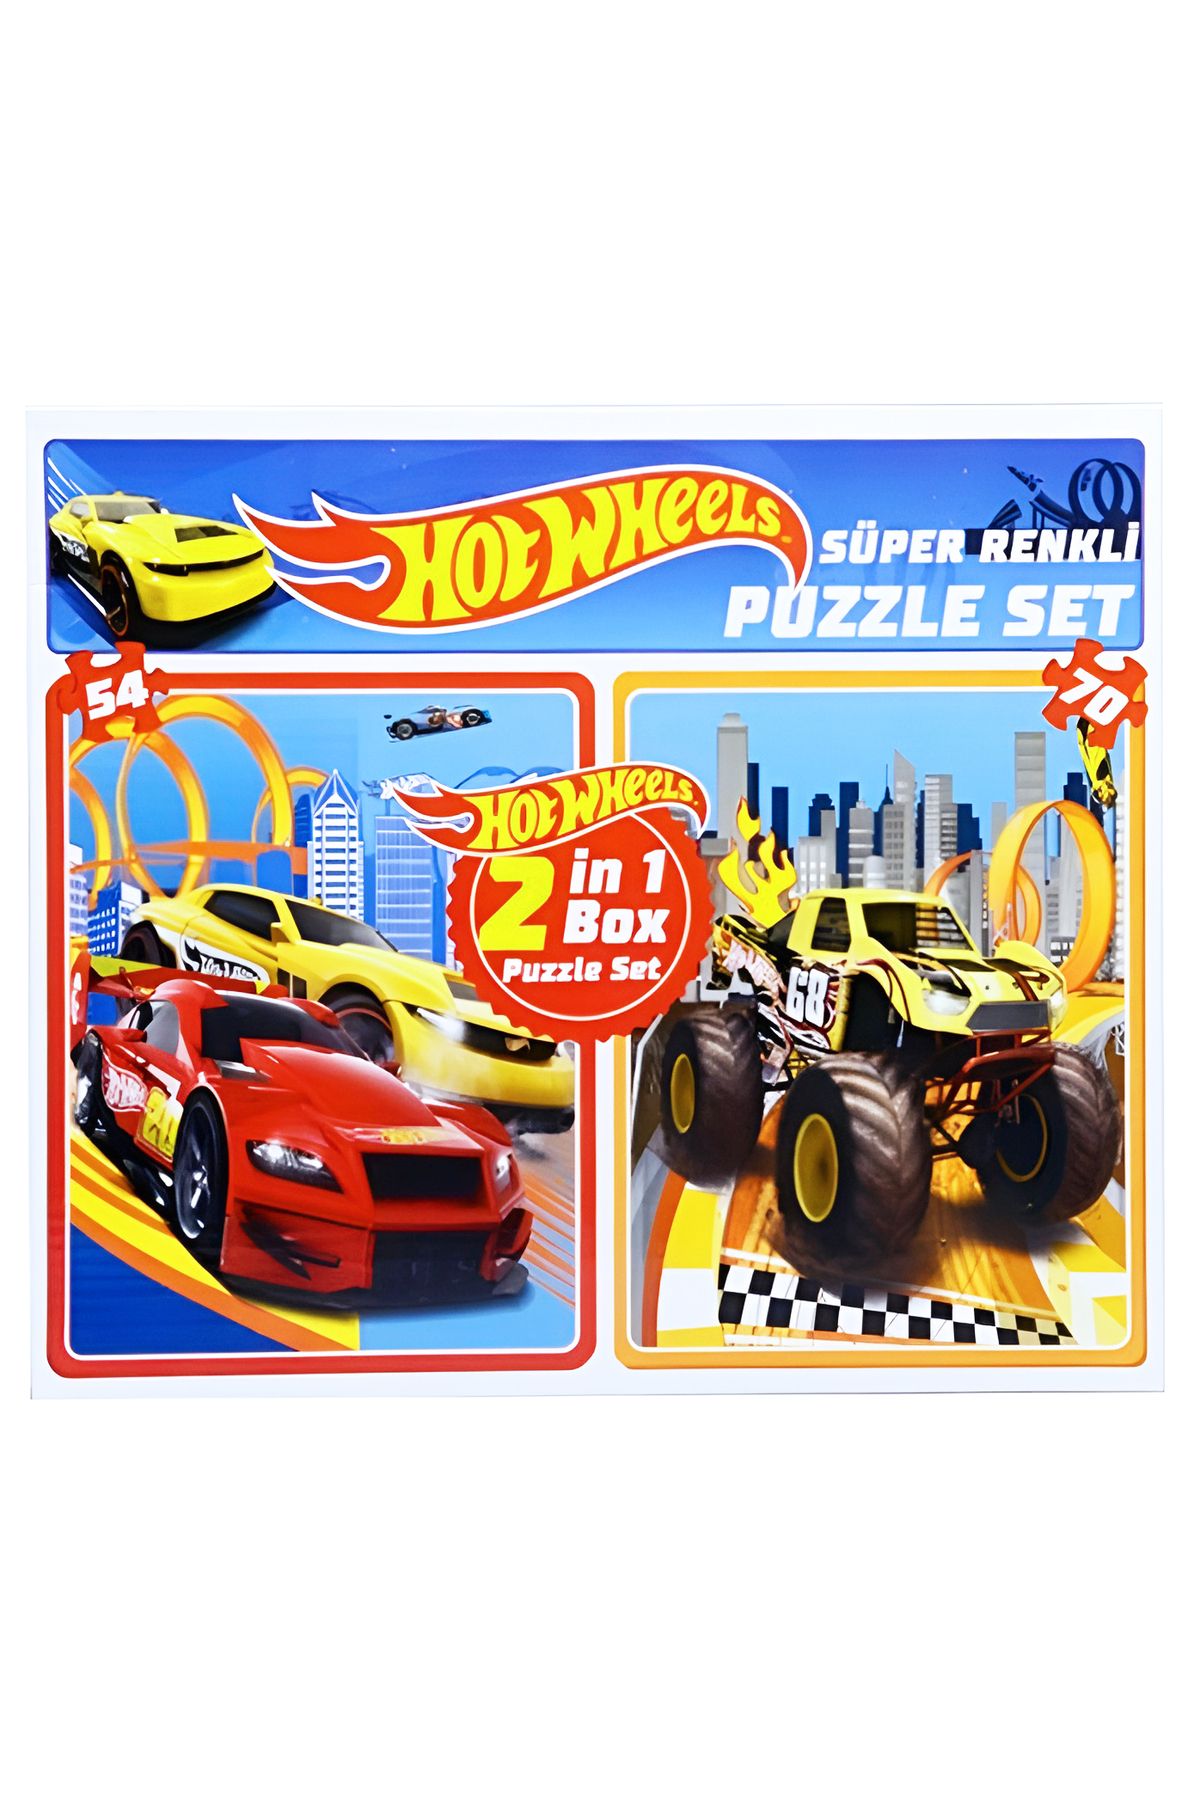 HOT WHEELS Diytoy Hot Wheels 2 in 1 Puzzle